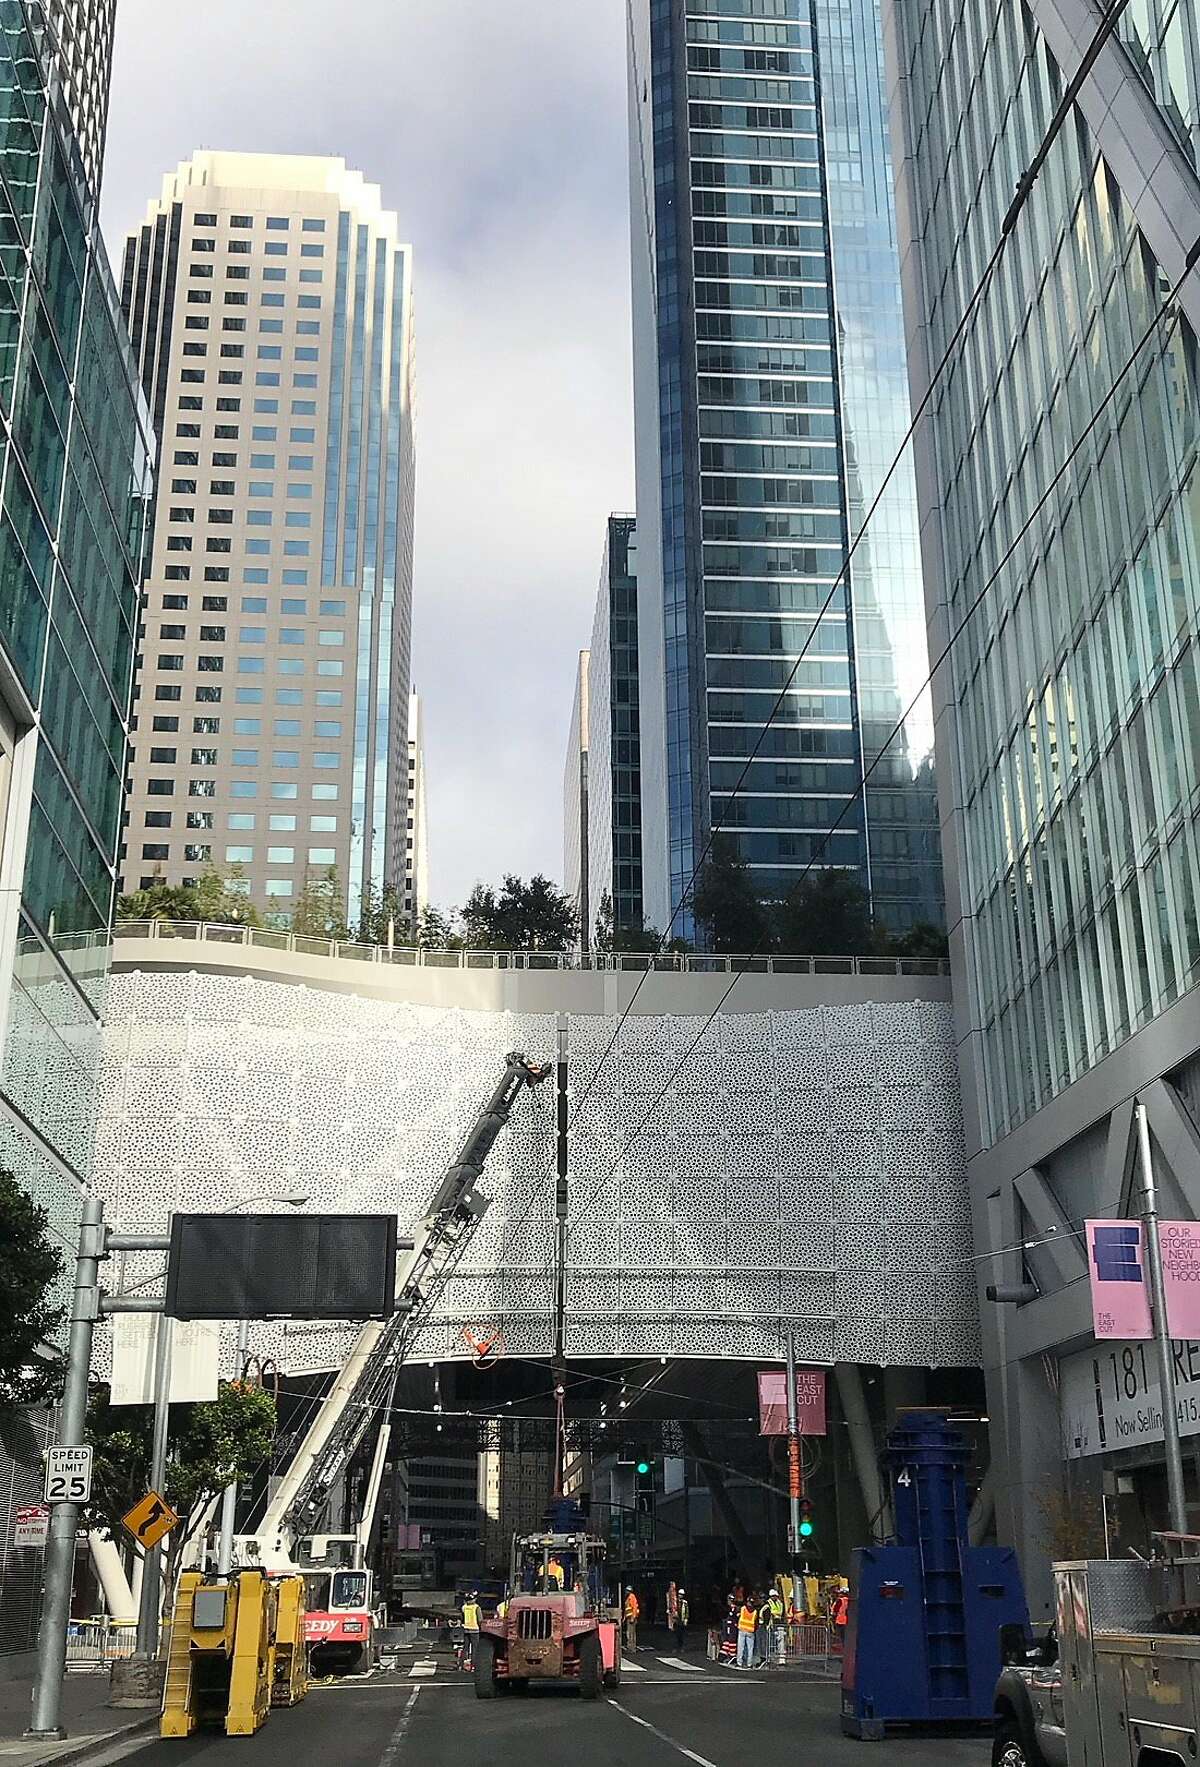 Workers at the Transbay Transit Center unload hydraulic jacks that will be used to temporarily support the damaged building while cracked beams are inspected.